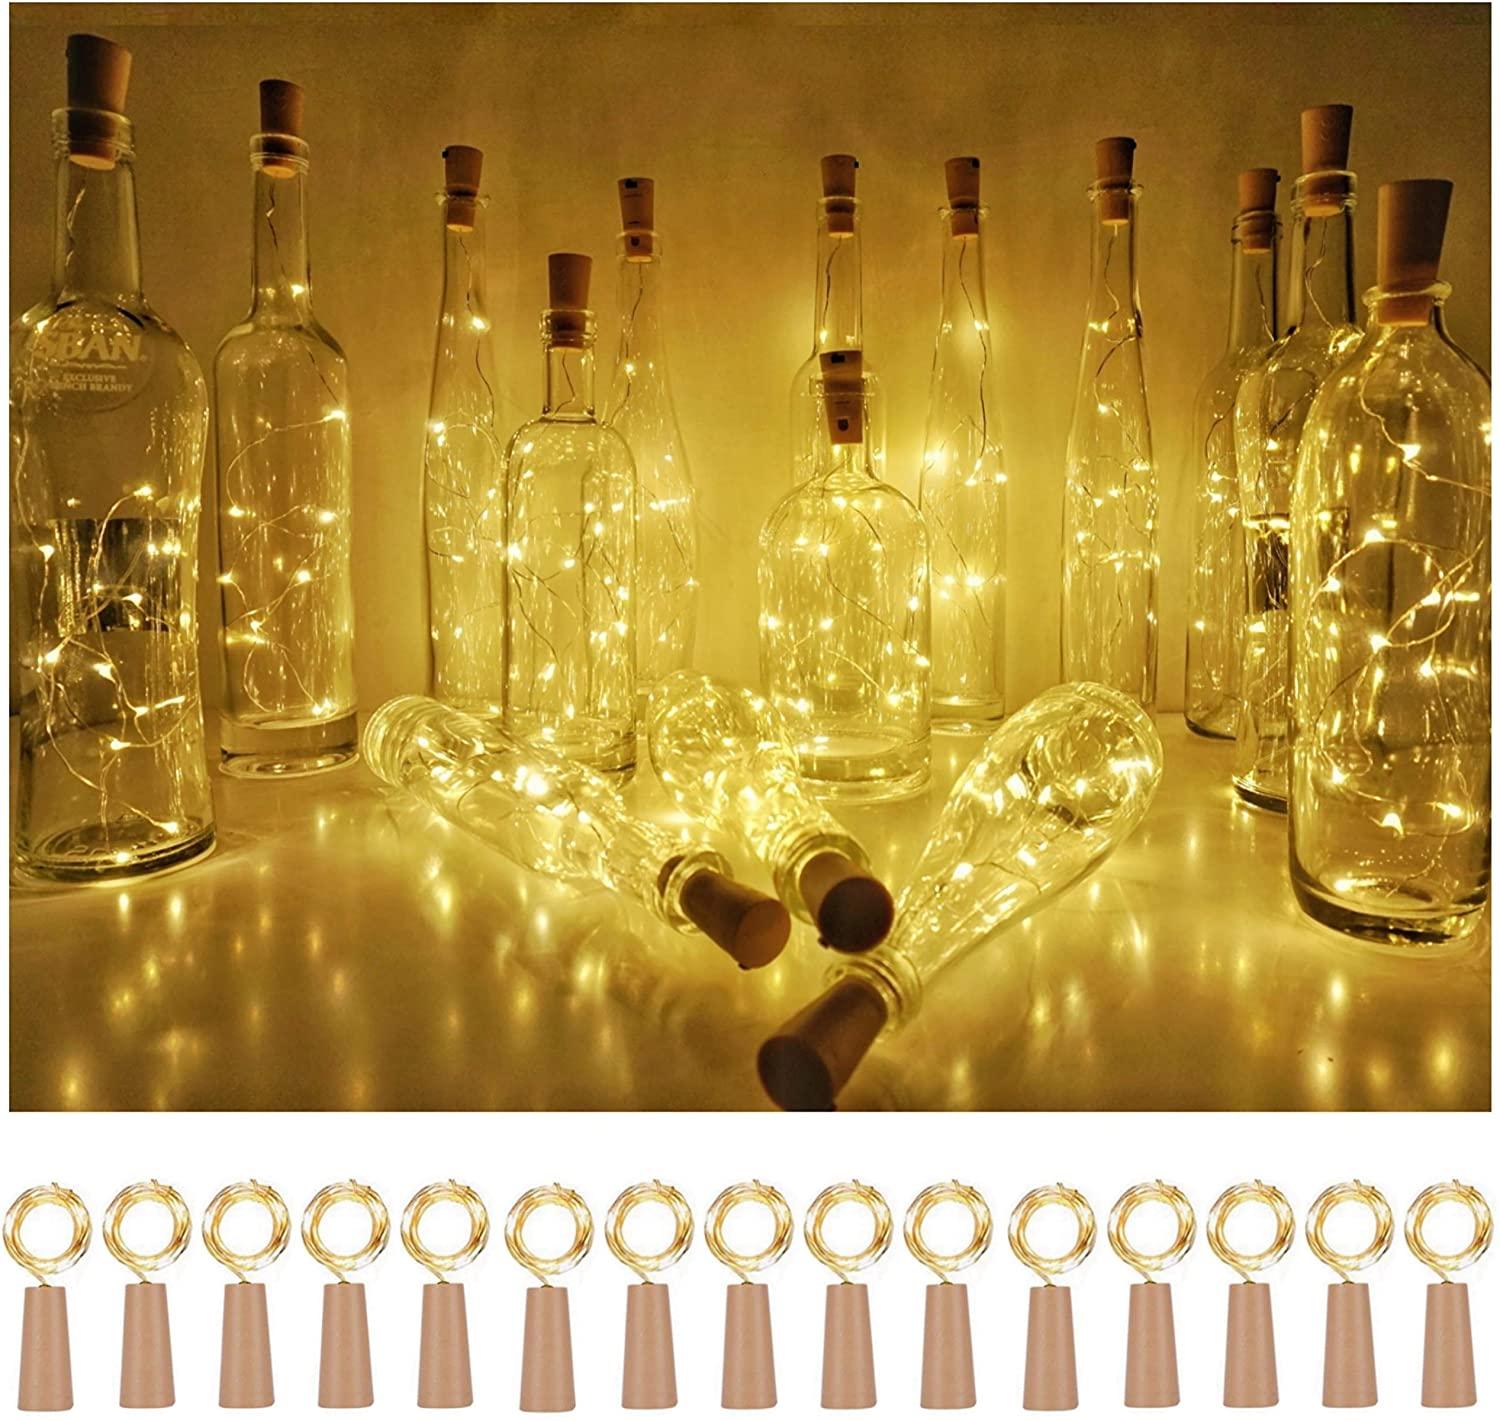 Wine Bottle Cork Lights 10 Pack 10 LED/ 40 Inches Battery Operated Cork Shape Copper Wire Colorful Fairy Mini String Lights - Decotree.co Online Shop